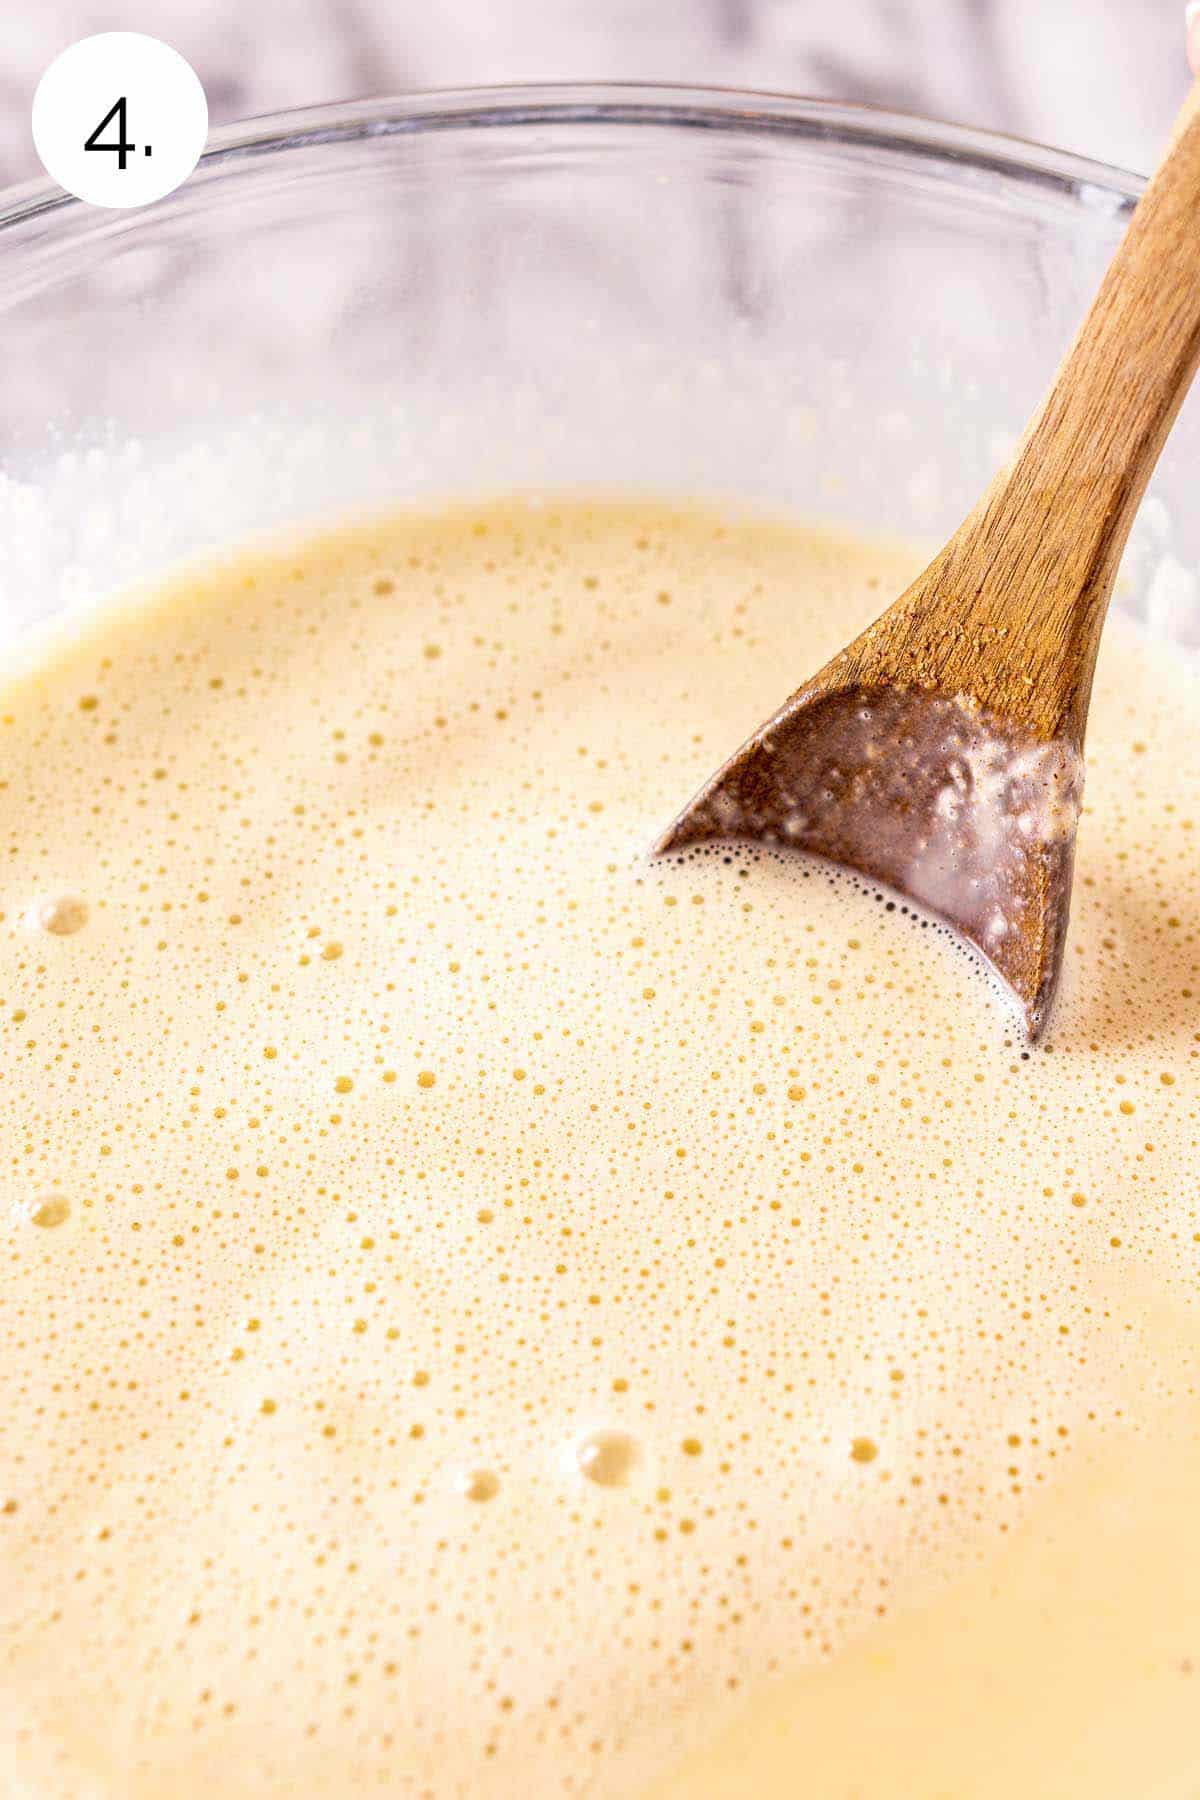 Stirring the Baileys into the egg mixture with a wooden spoon in a large glass mixing bowl.